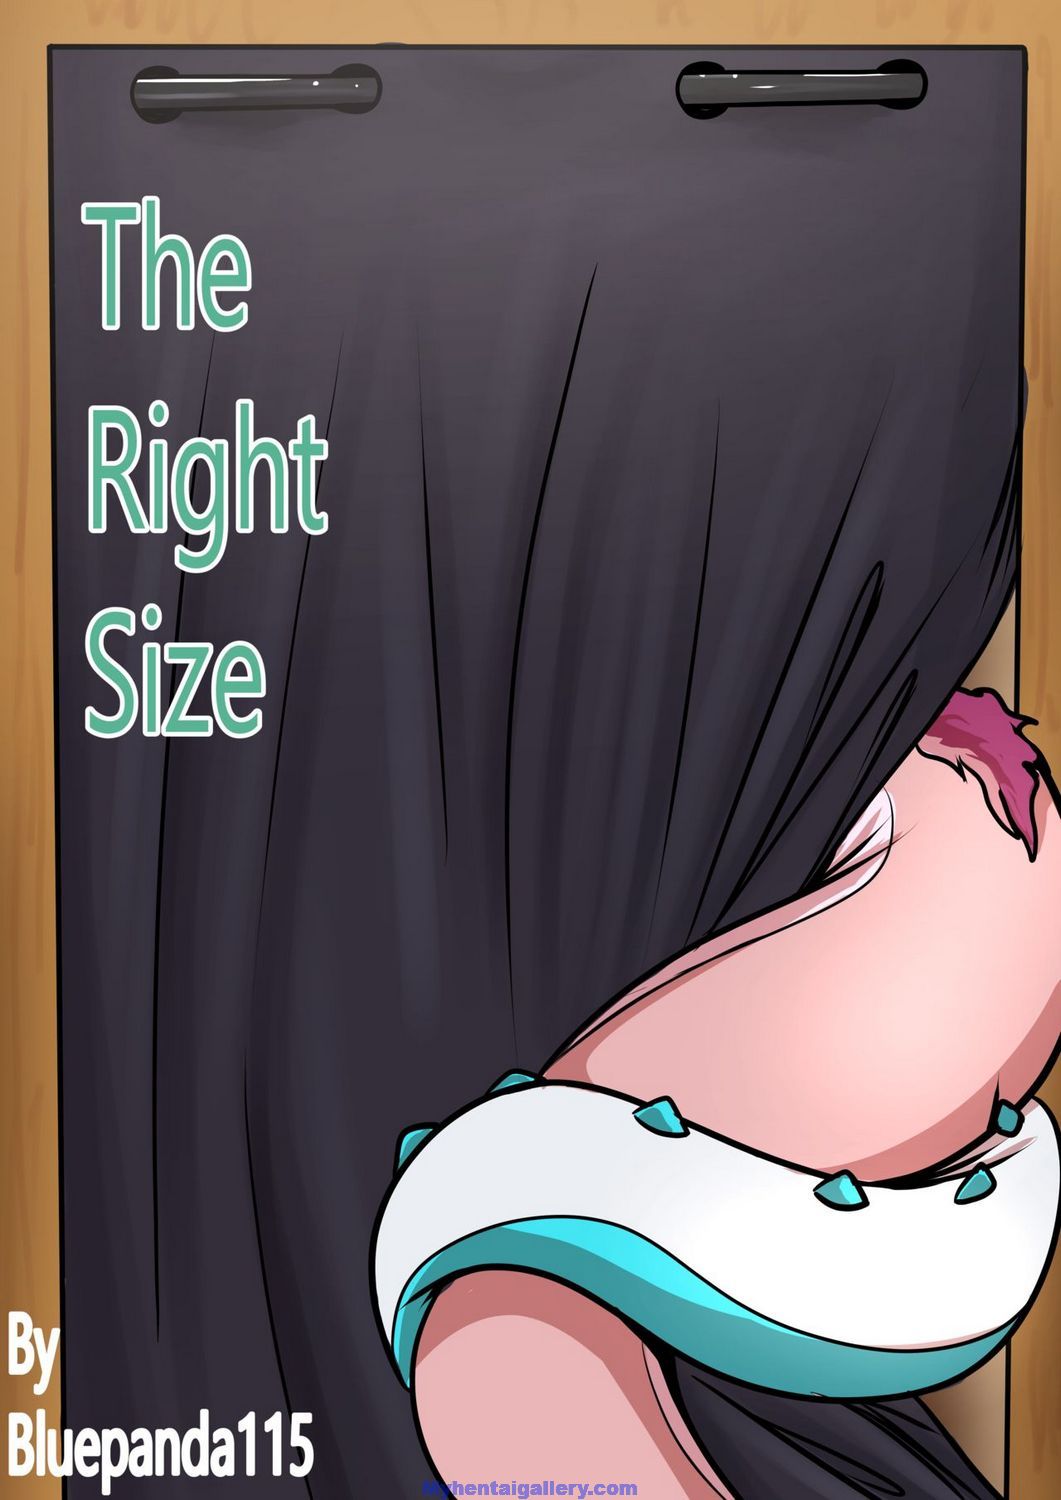 The Right Size